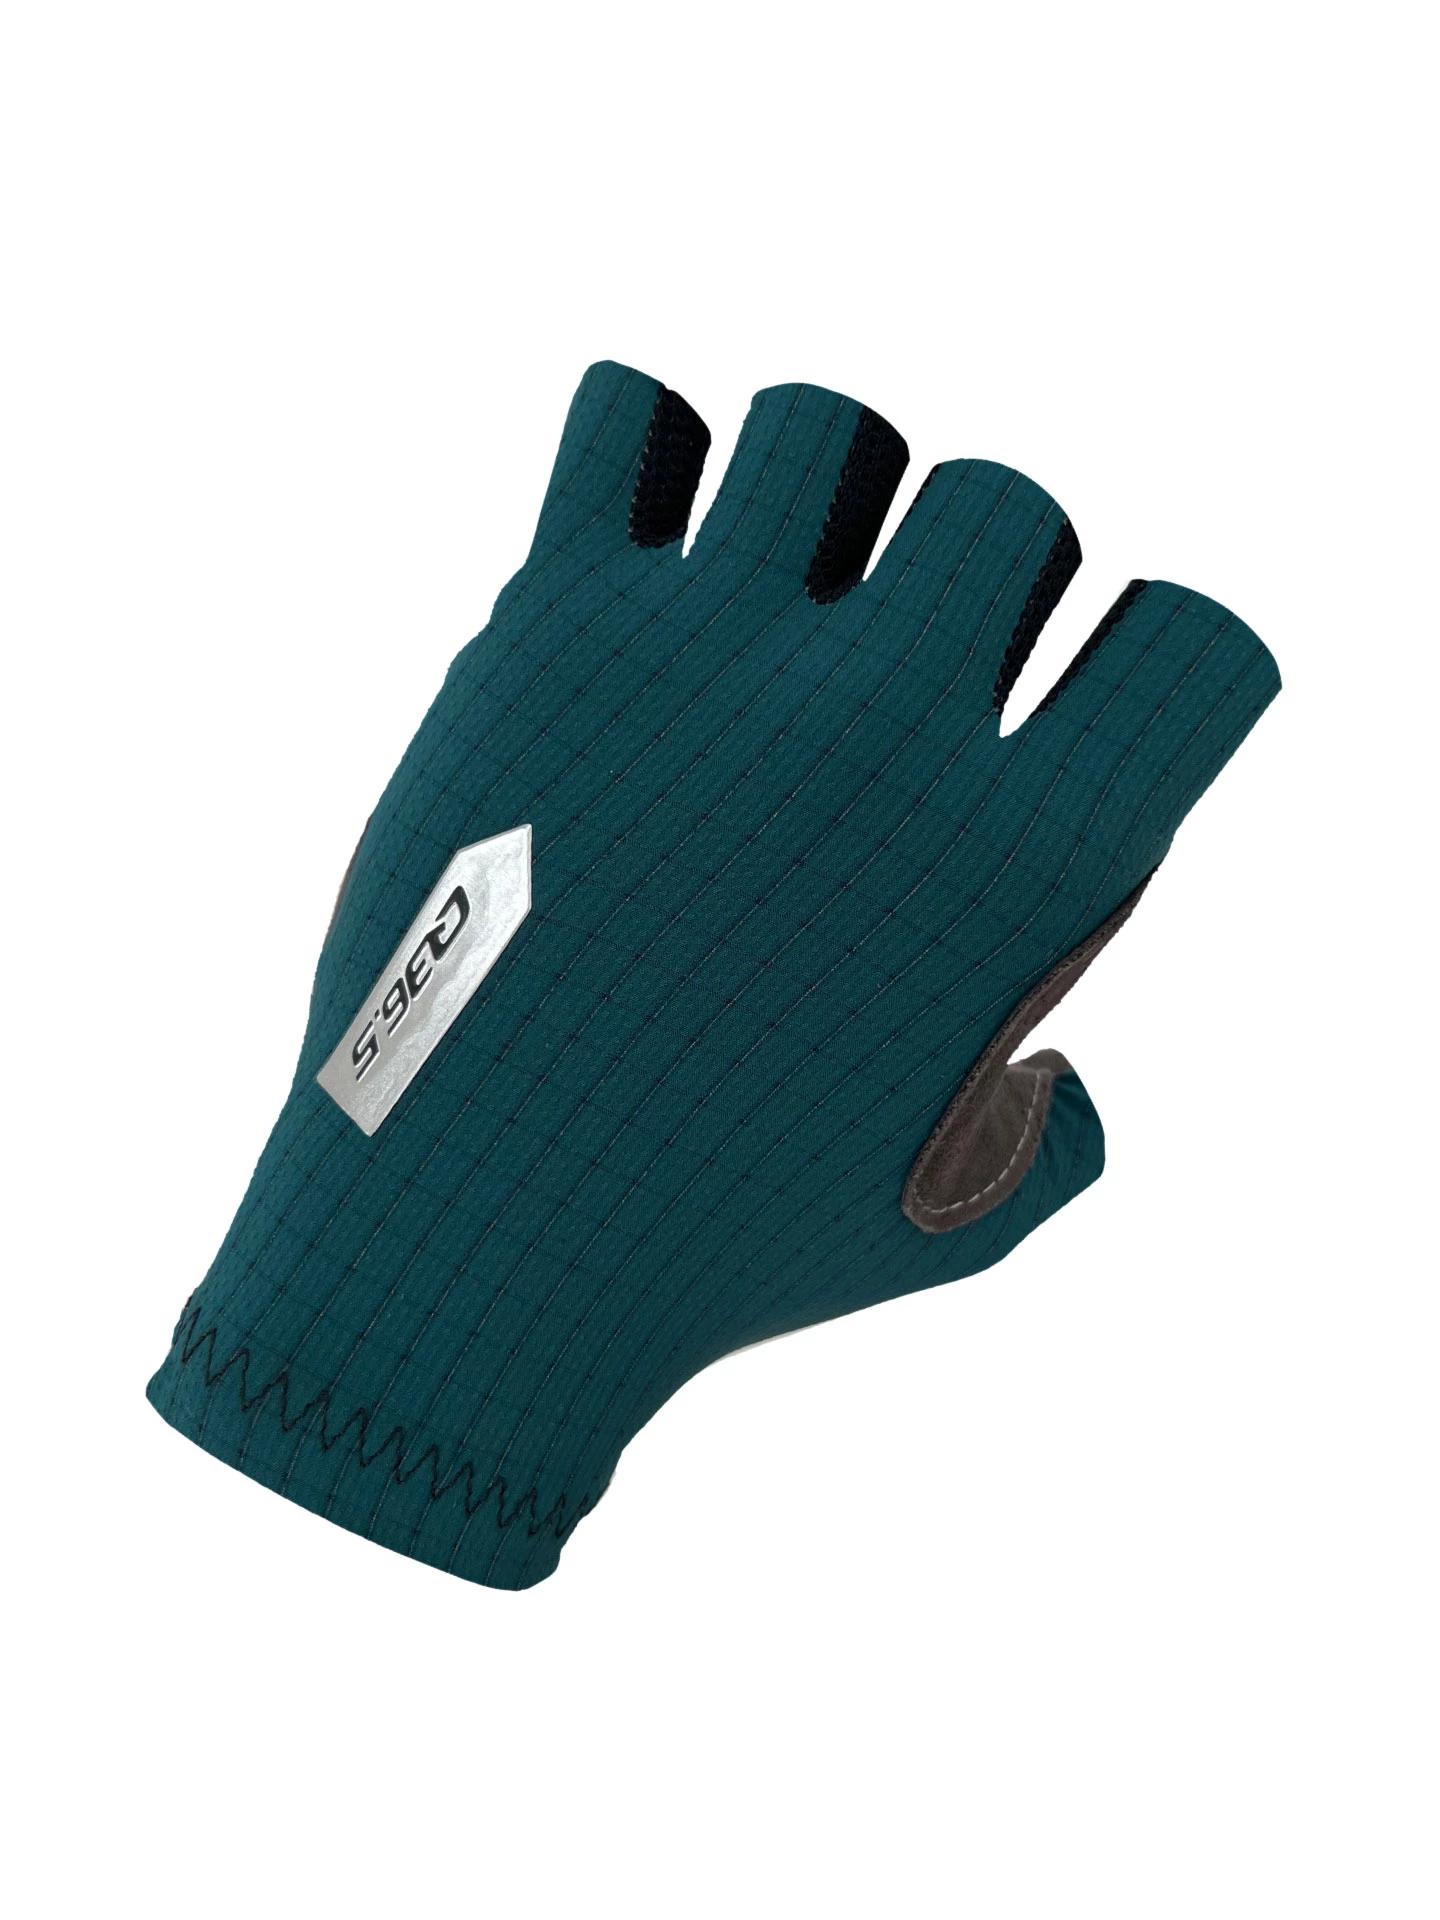 Mens cycling gloves, best winter, thermal & summer gloves • Q36.5